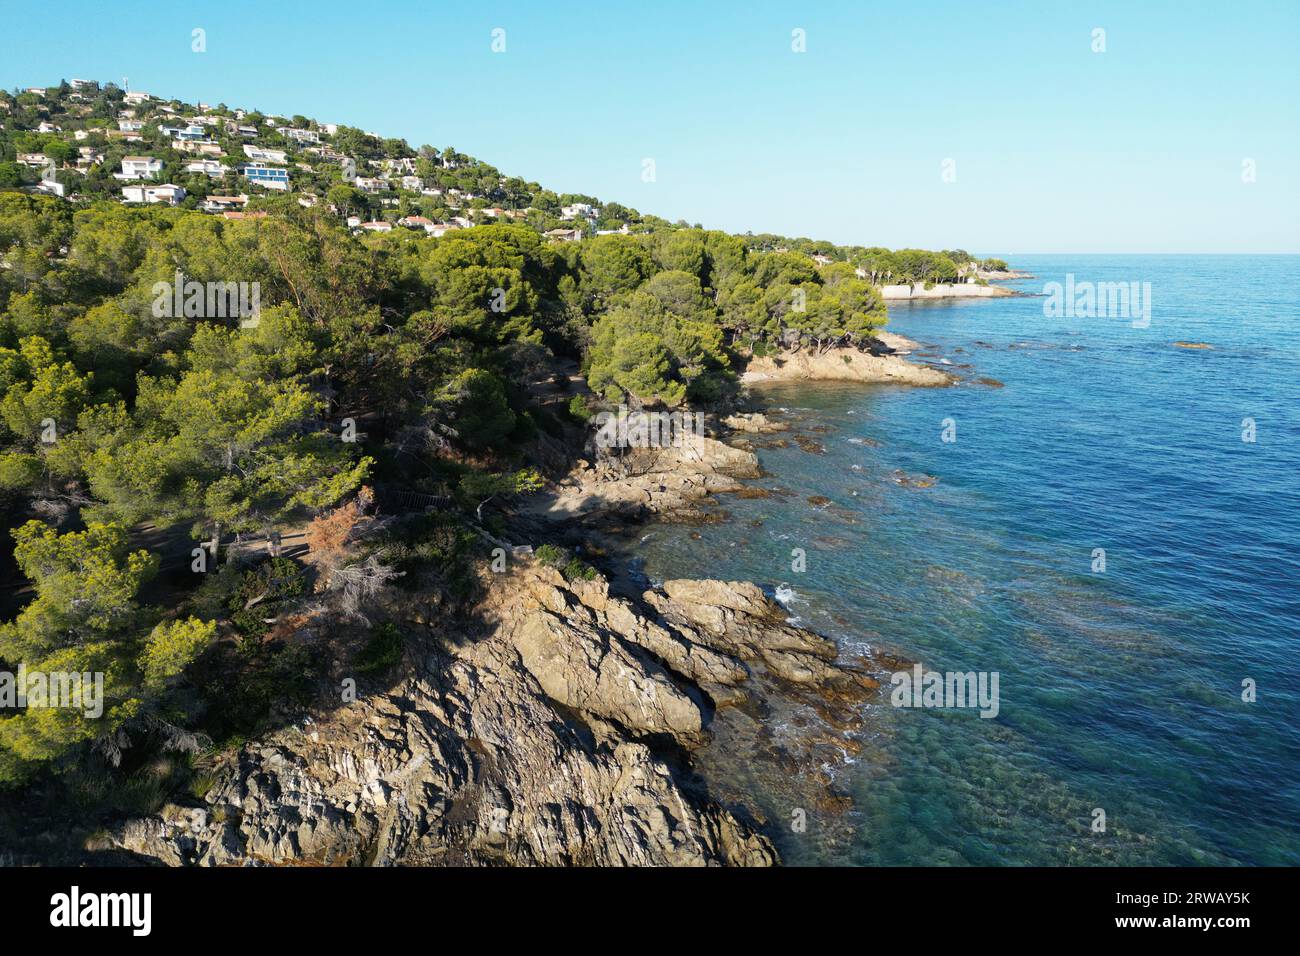 Aerial Photo of the rocky coast at Les Issambres in the Var region of Provence-Alpes-Côte d'Azur Region of South Eastern France. Stock Photo